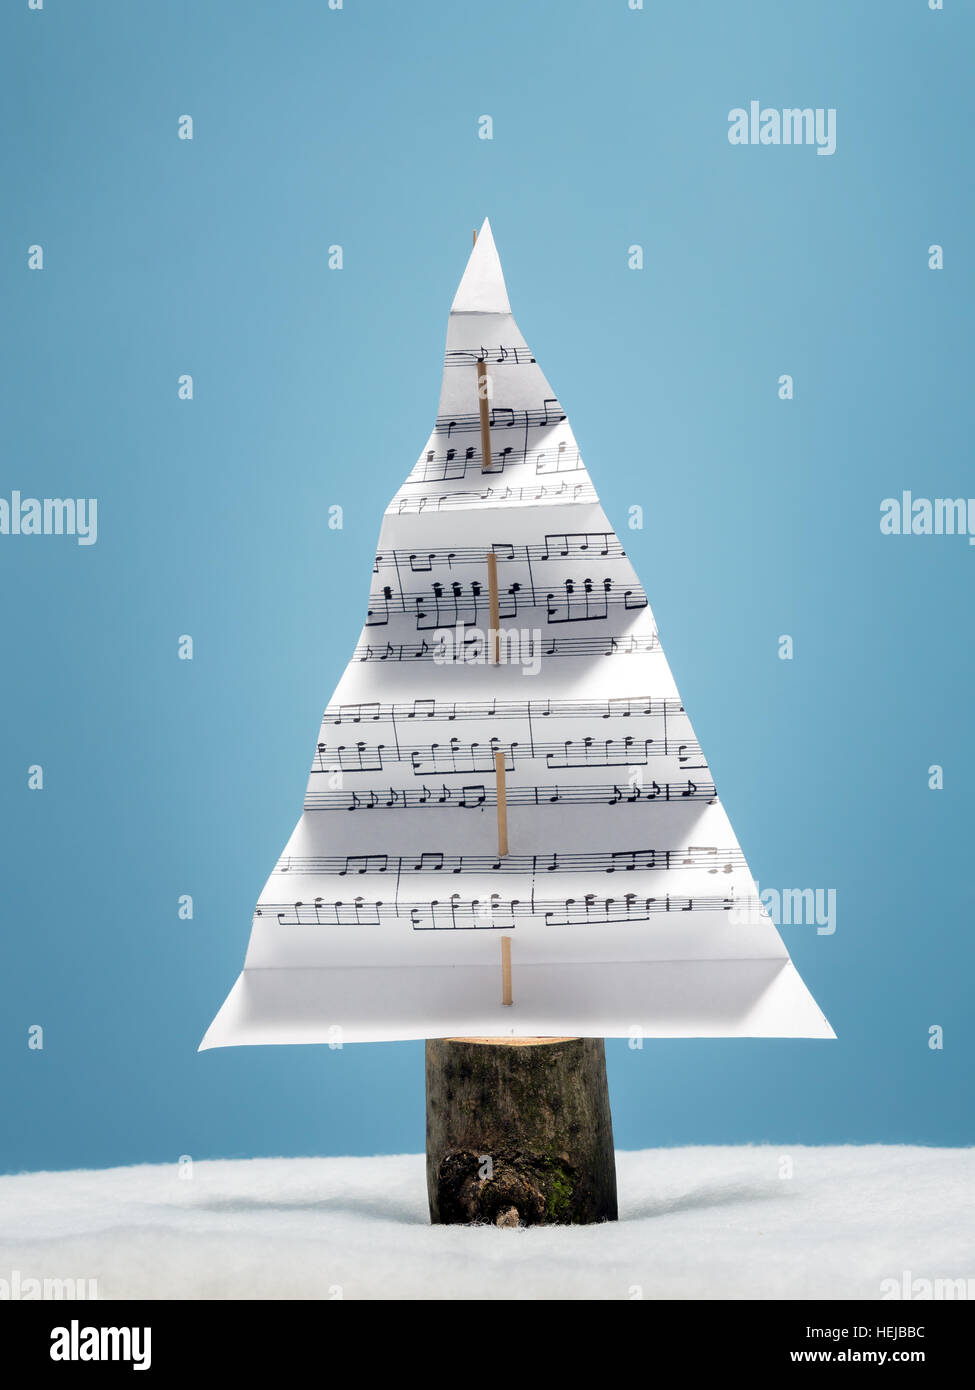 Paper christmas tree with christmas carol notes over light blue background Stock Photo